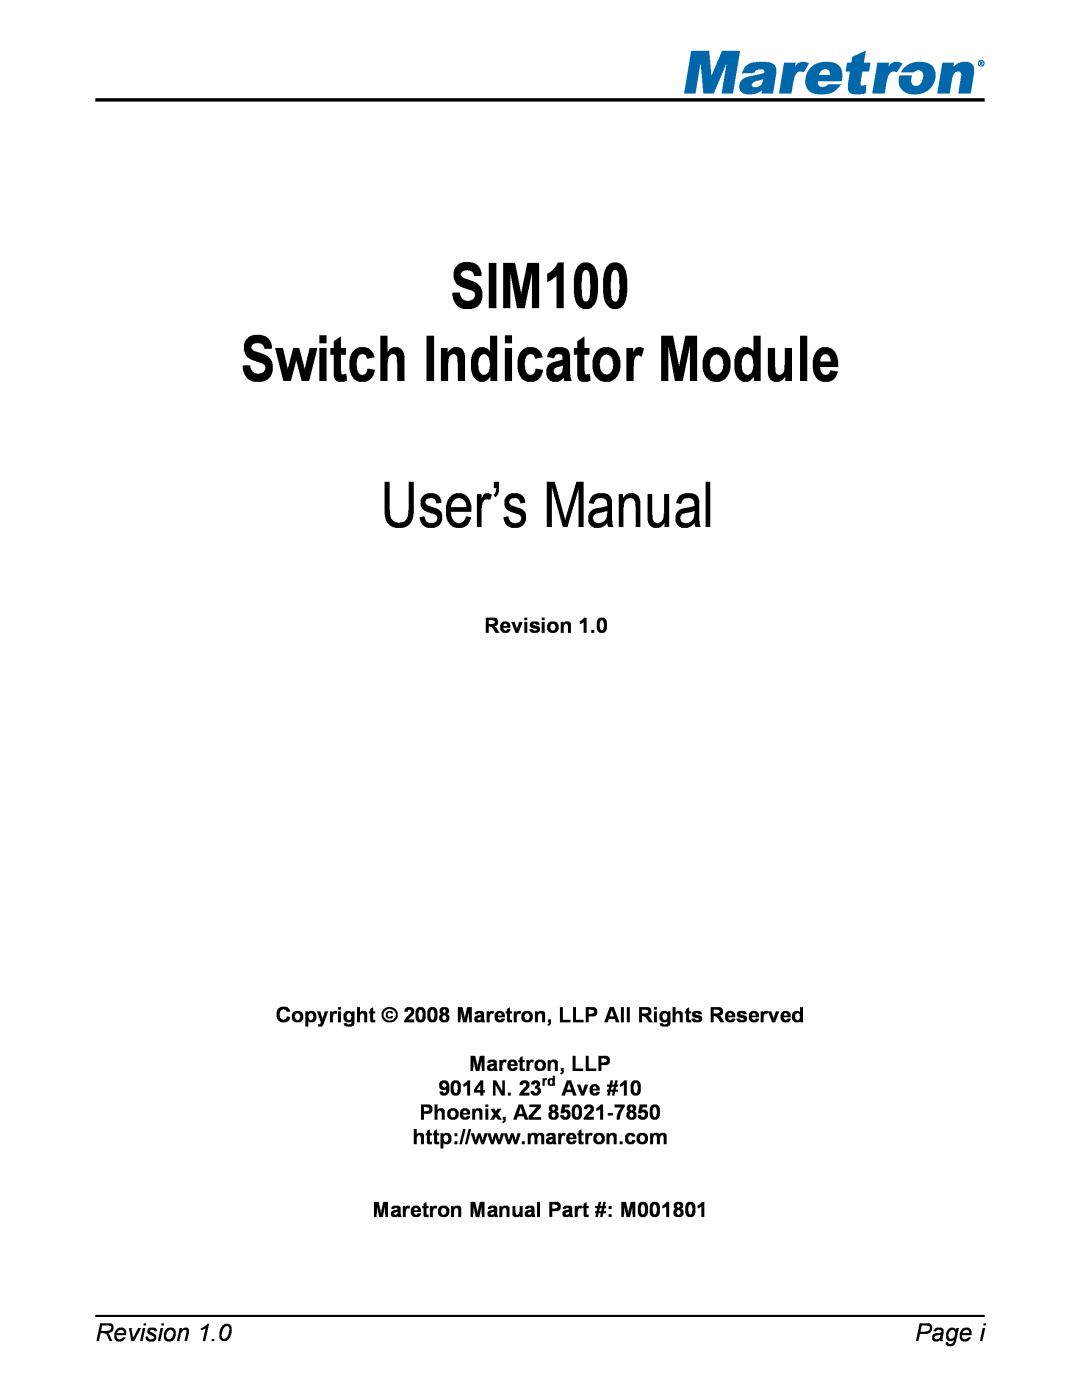 Maretron SIM100 user manual Page, Revision Copyright 2008 Maretron, LLP All Rights Reserved, Maretron Manual M001801 